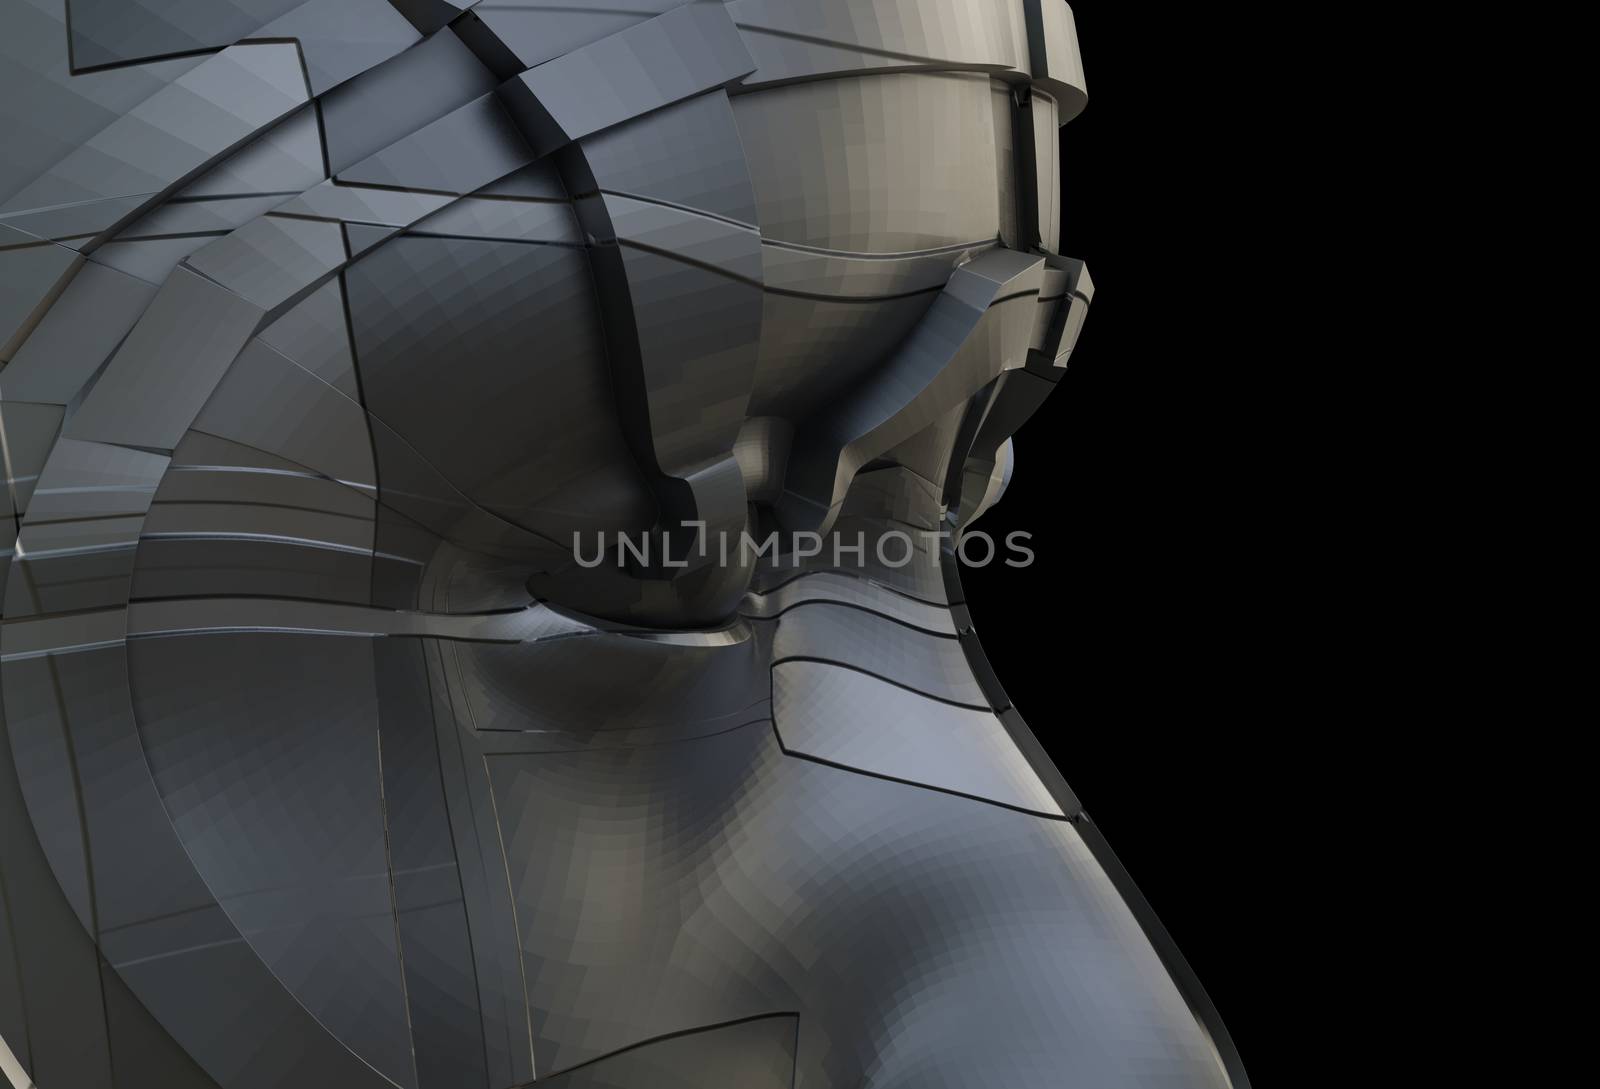 Futuristic robot of dark color with luminous parts by cherezoff